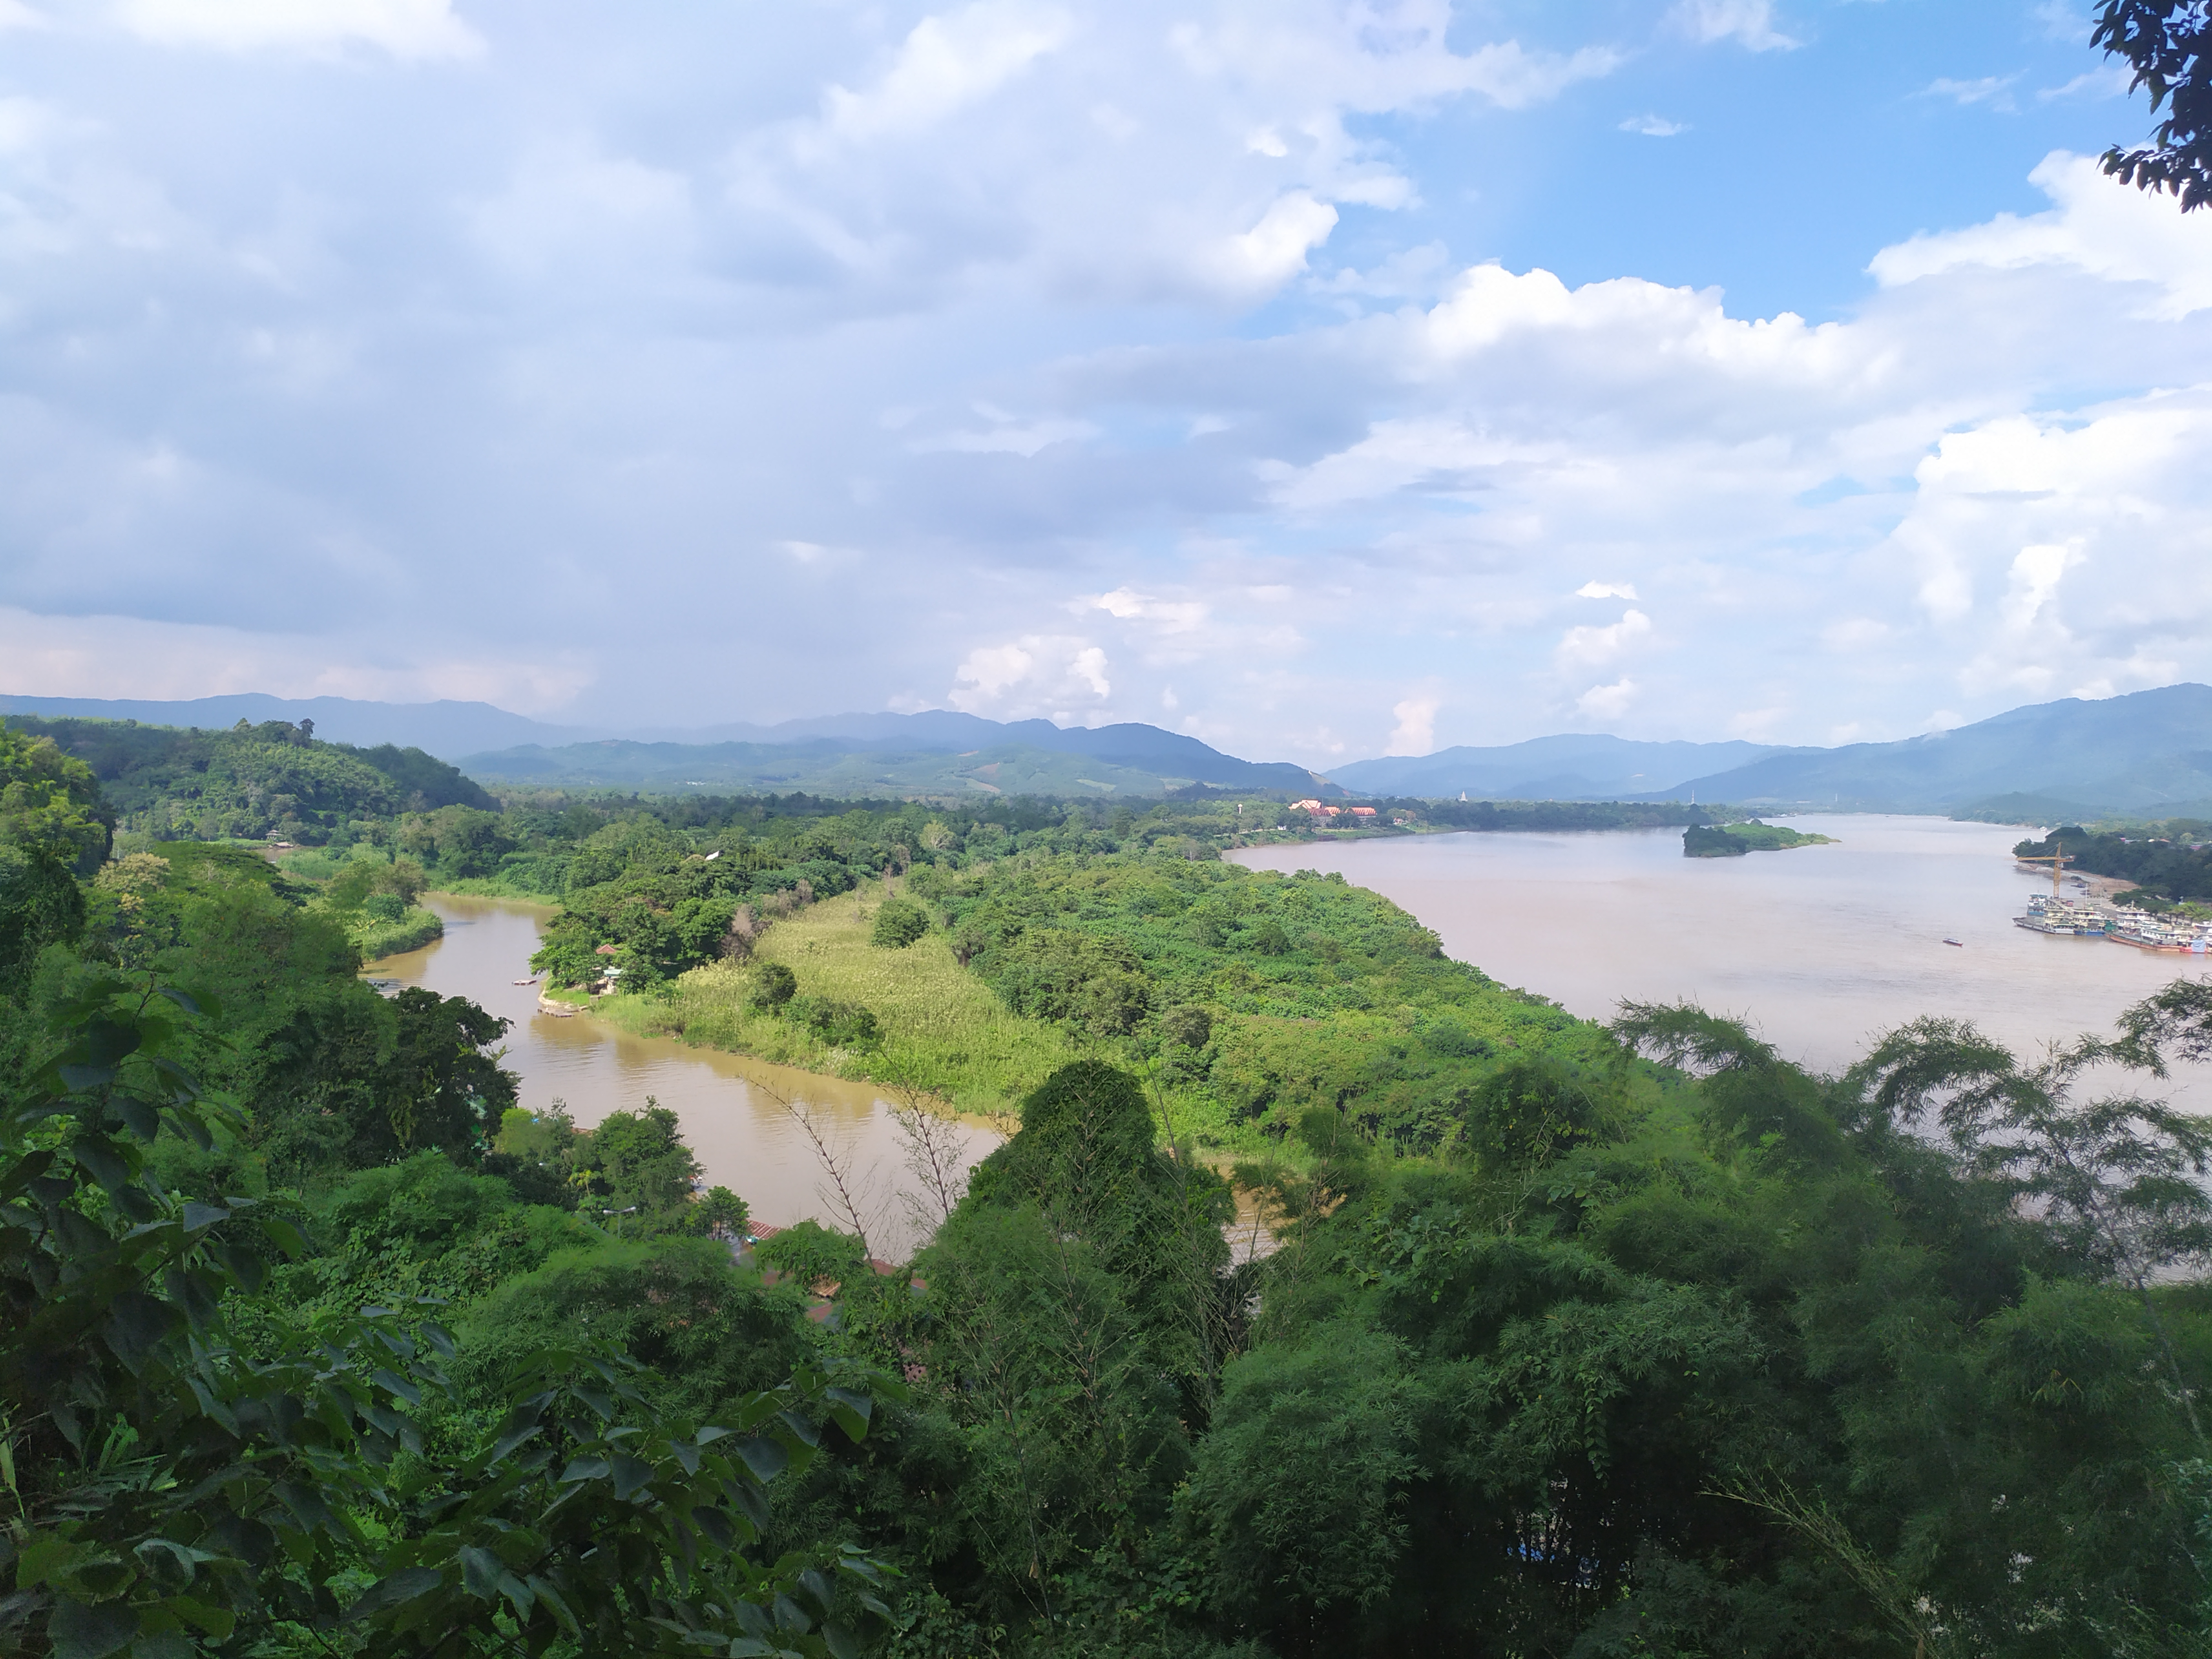 Calling for a change in the Mekong: Reflections on the "Mekong School" and ecologically-driven development